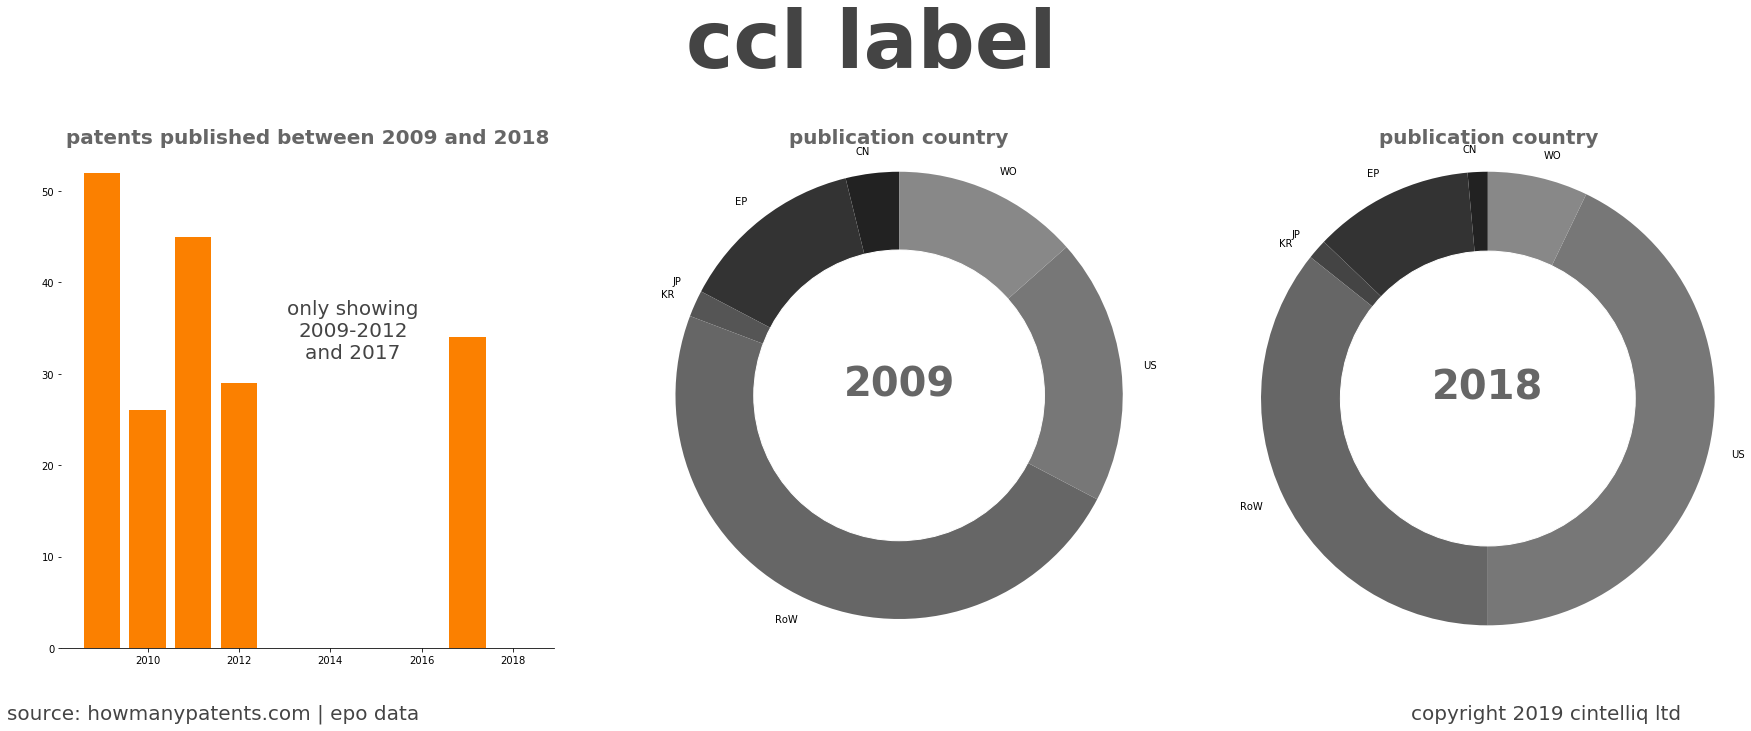 summary of patents for Ccl Label